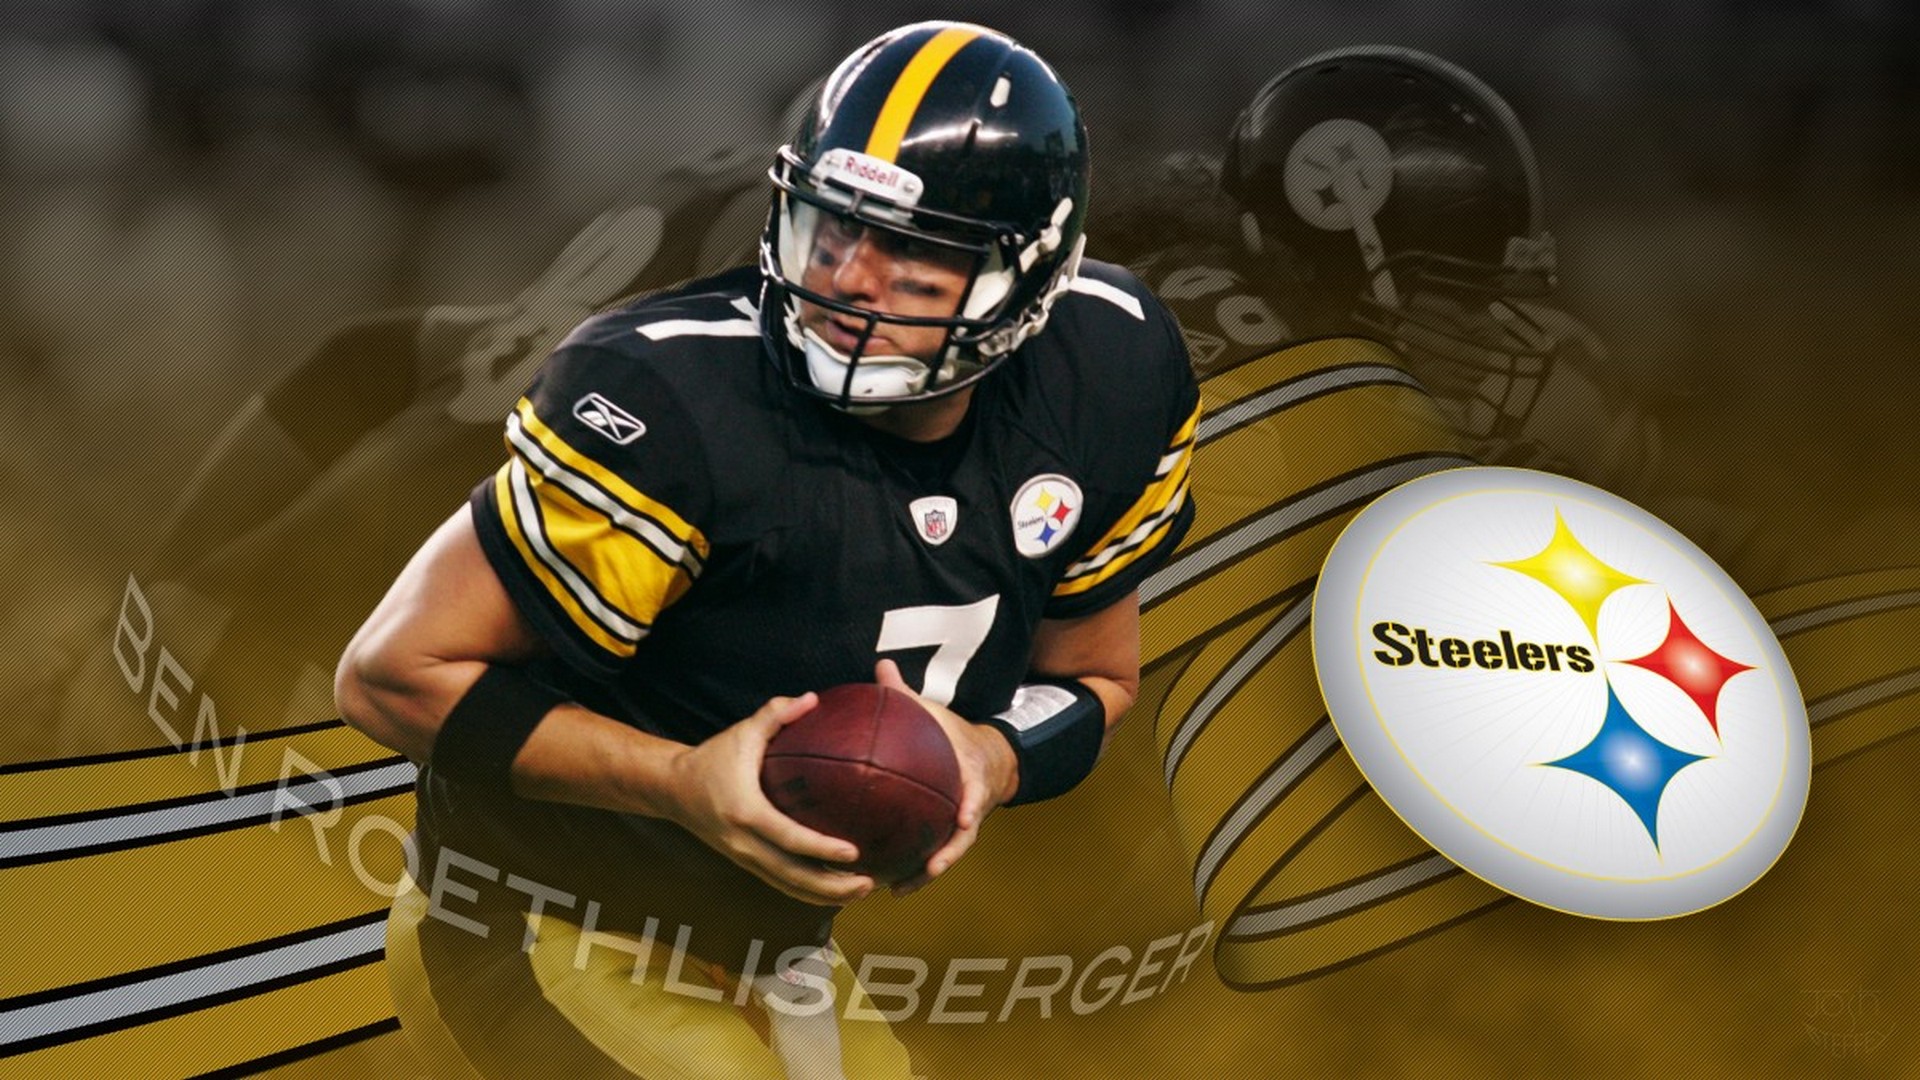 Wallpapers HD Pittsburgh Steelers Football With Resolution 1920X1080 pixel. You can make this wallpaper for your Mac or Windows Desktop Background, iPhone, Android or Tablet and another Smartphone device for free